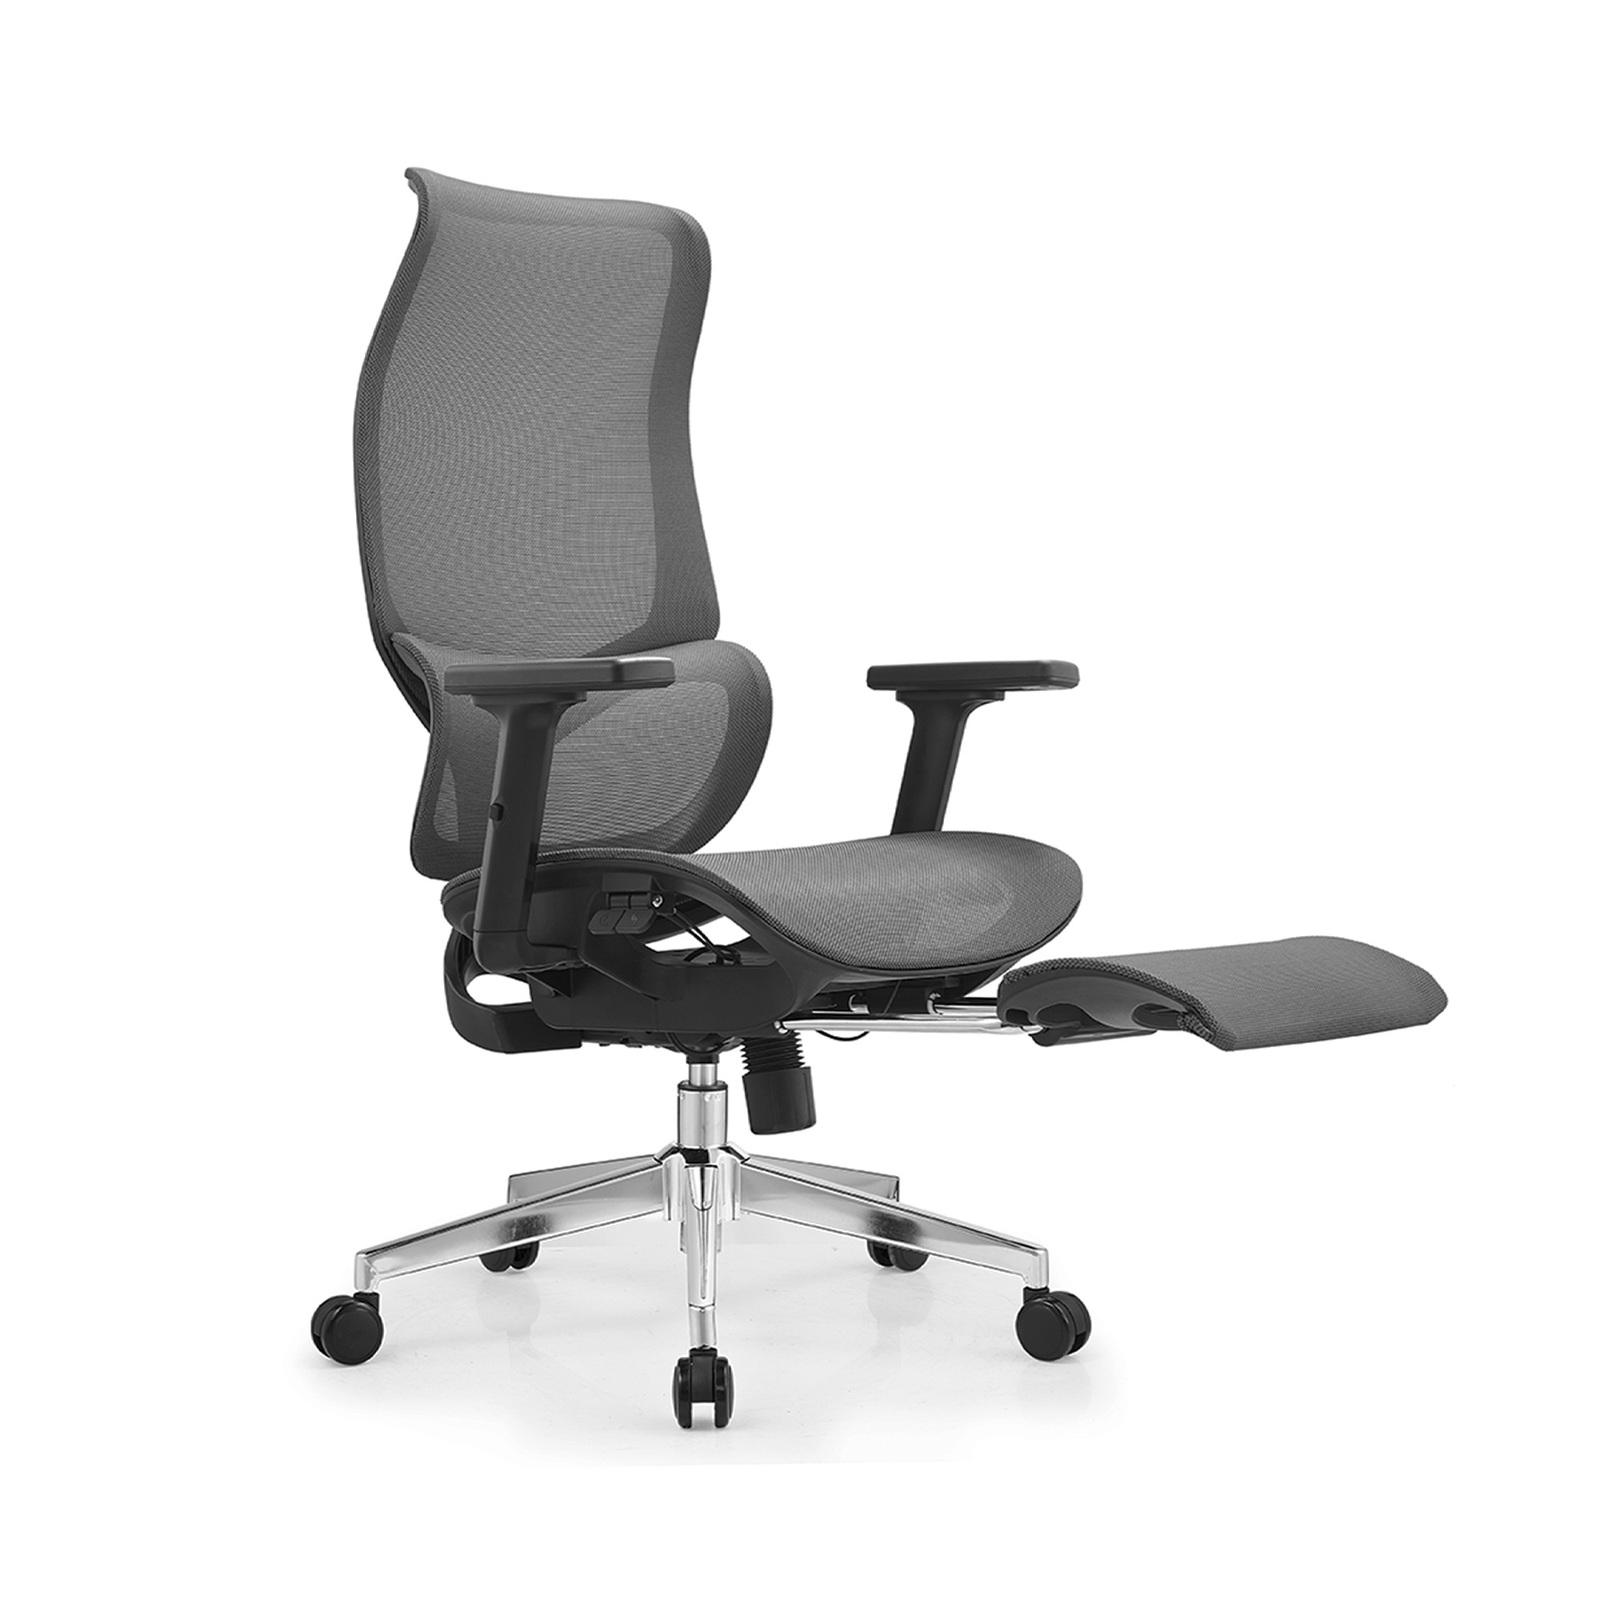 Ergonomic Mesh Gaming Office Chair Office Chairs Executive Footrest Computer Seat - Black